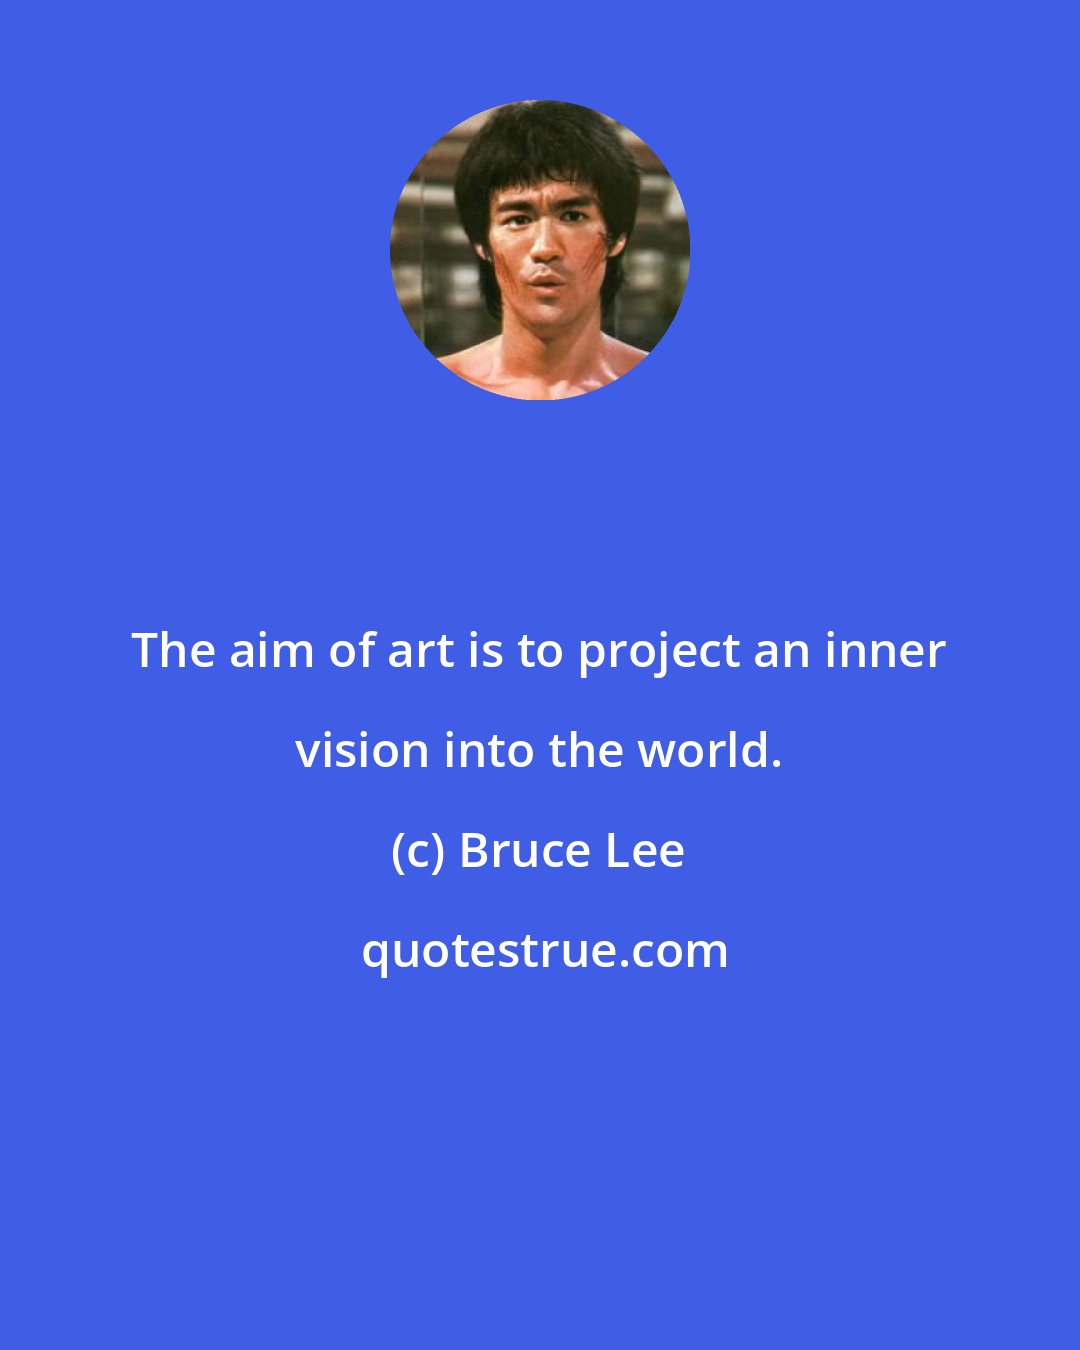 Bruce Lee: The aim of art is to project an inner vision into the world.